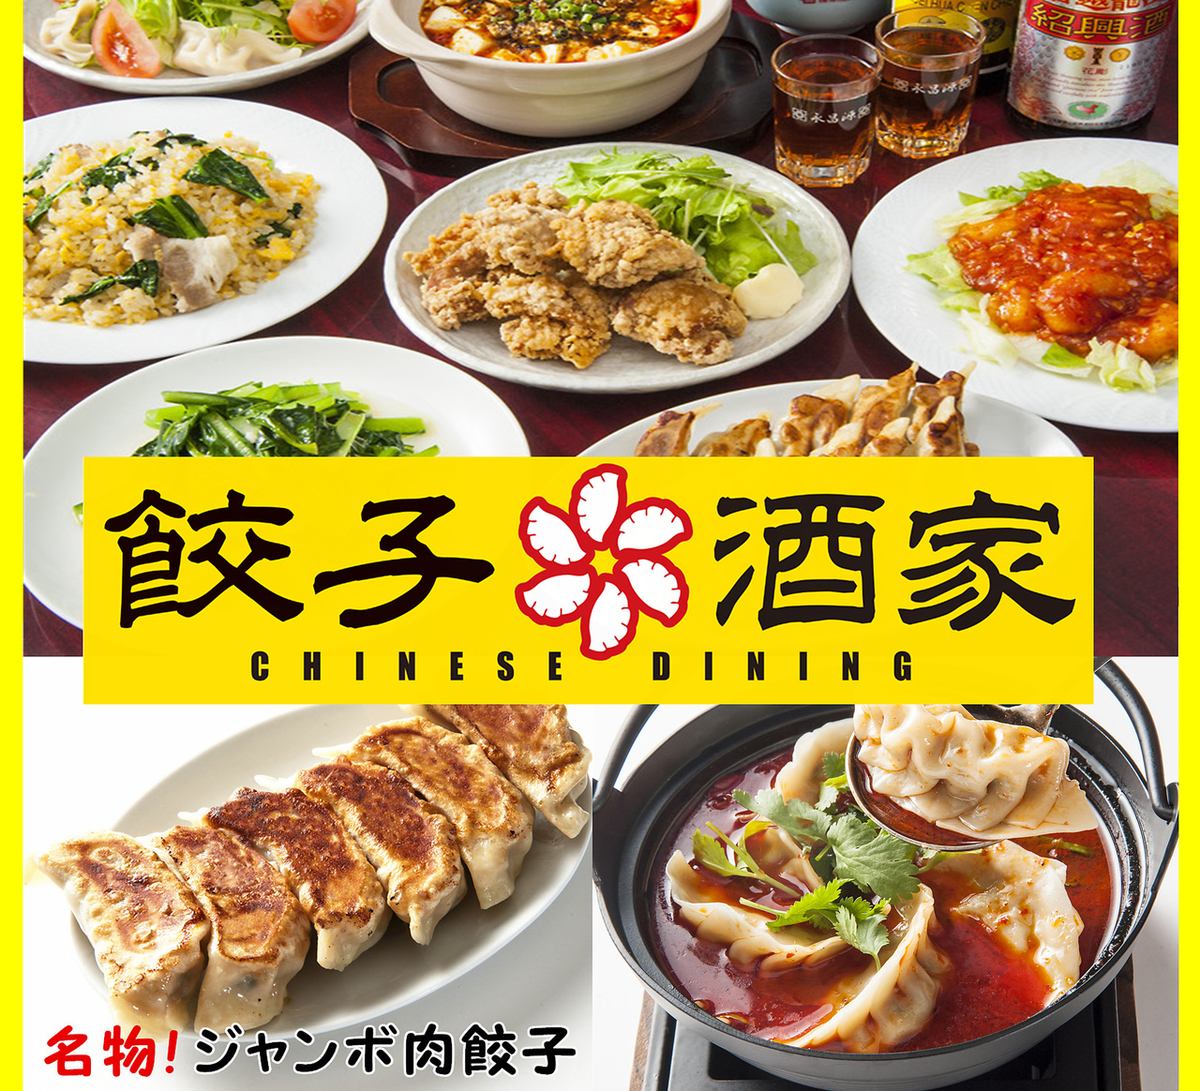 Authentic Chinese food and a specialty! A Chinese izakaya where you can enjoy jumbo meat dumplings!